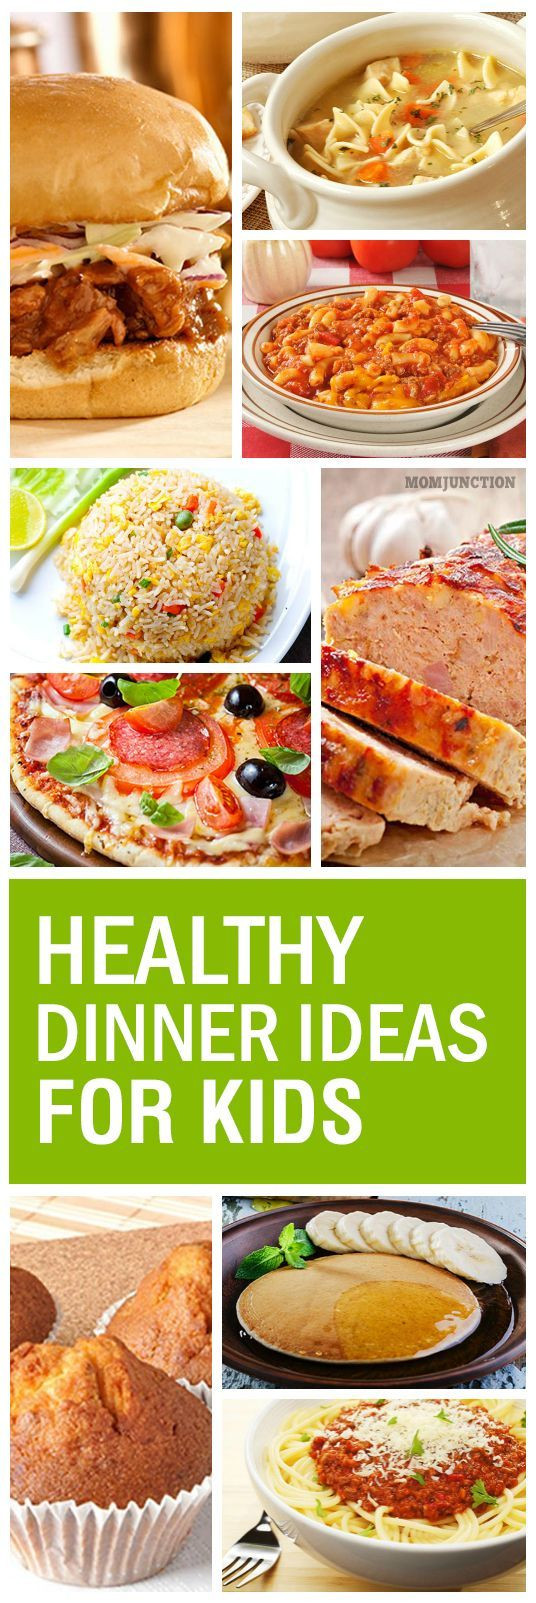 Easy Healthy Recipes For Dinner
 15 Quick And Yummy Dinner Recipes For Kids